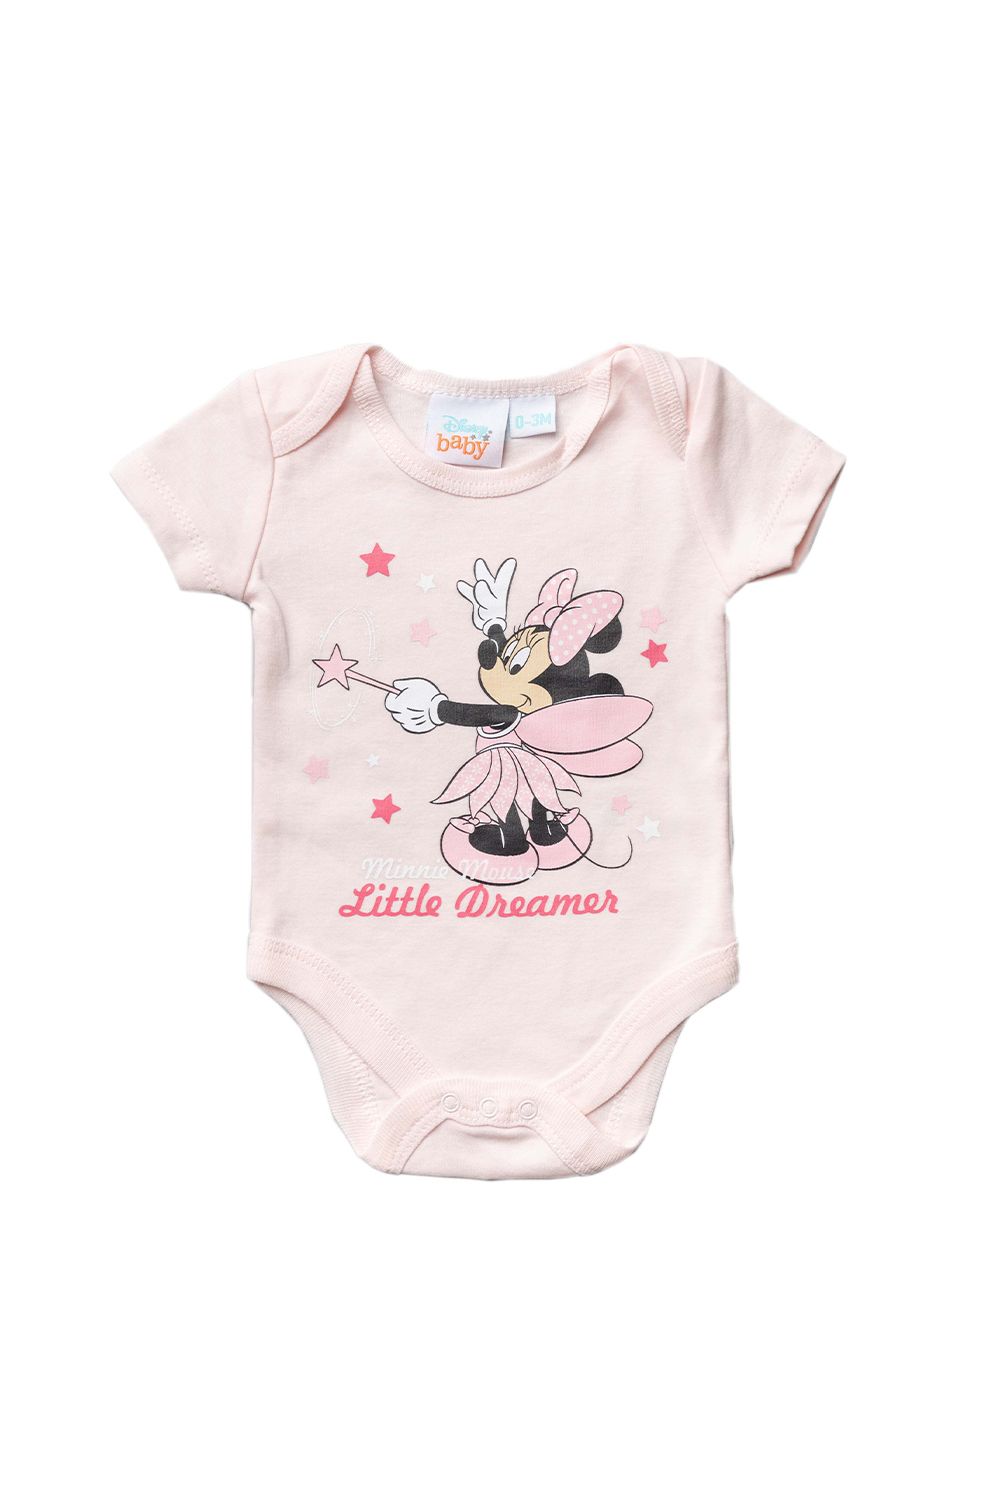 This adorable Disney Baby, Fairy Minnie Mouse three-piece set features a neutral grey and baby pink colour scheme, with a Fairy Minnie Mouse print. The set includes a button-up, footed sleepsuit with Minnie Mouse cartoon print and baby pink lining, a bodysuit with the lettering ‘little dreamer’, and a matching bib. Each item in the set is cotton with popper fastenings, keeping your little one comfortable. This sweet three-piece set is the perfect gift for the little one in your life.